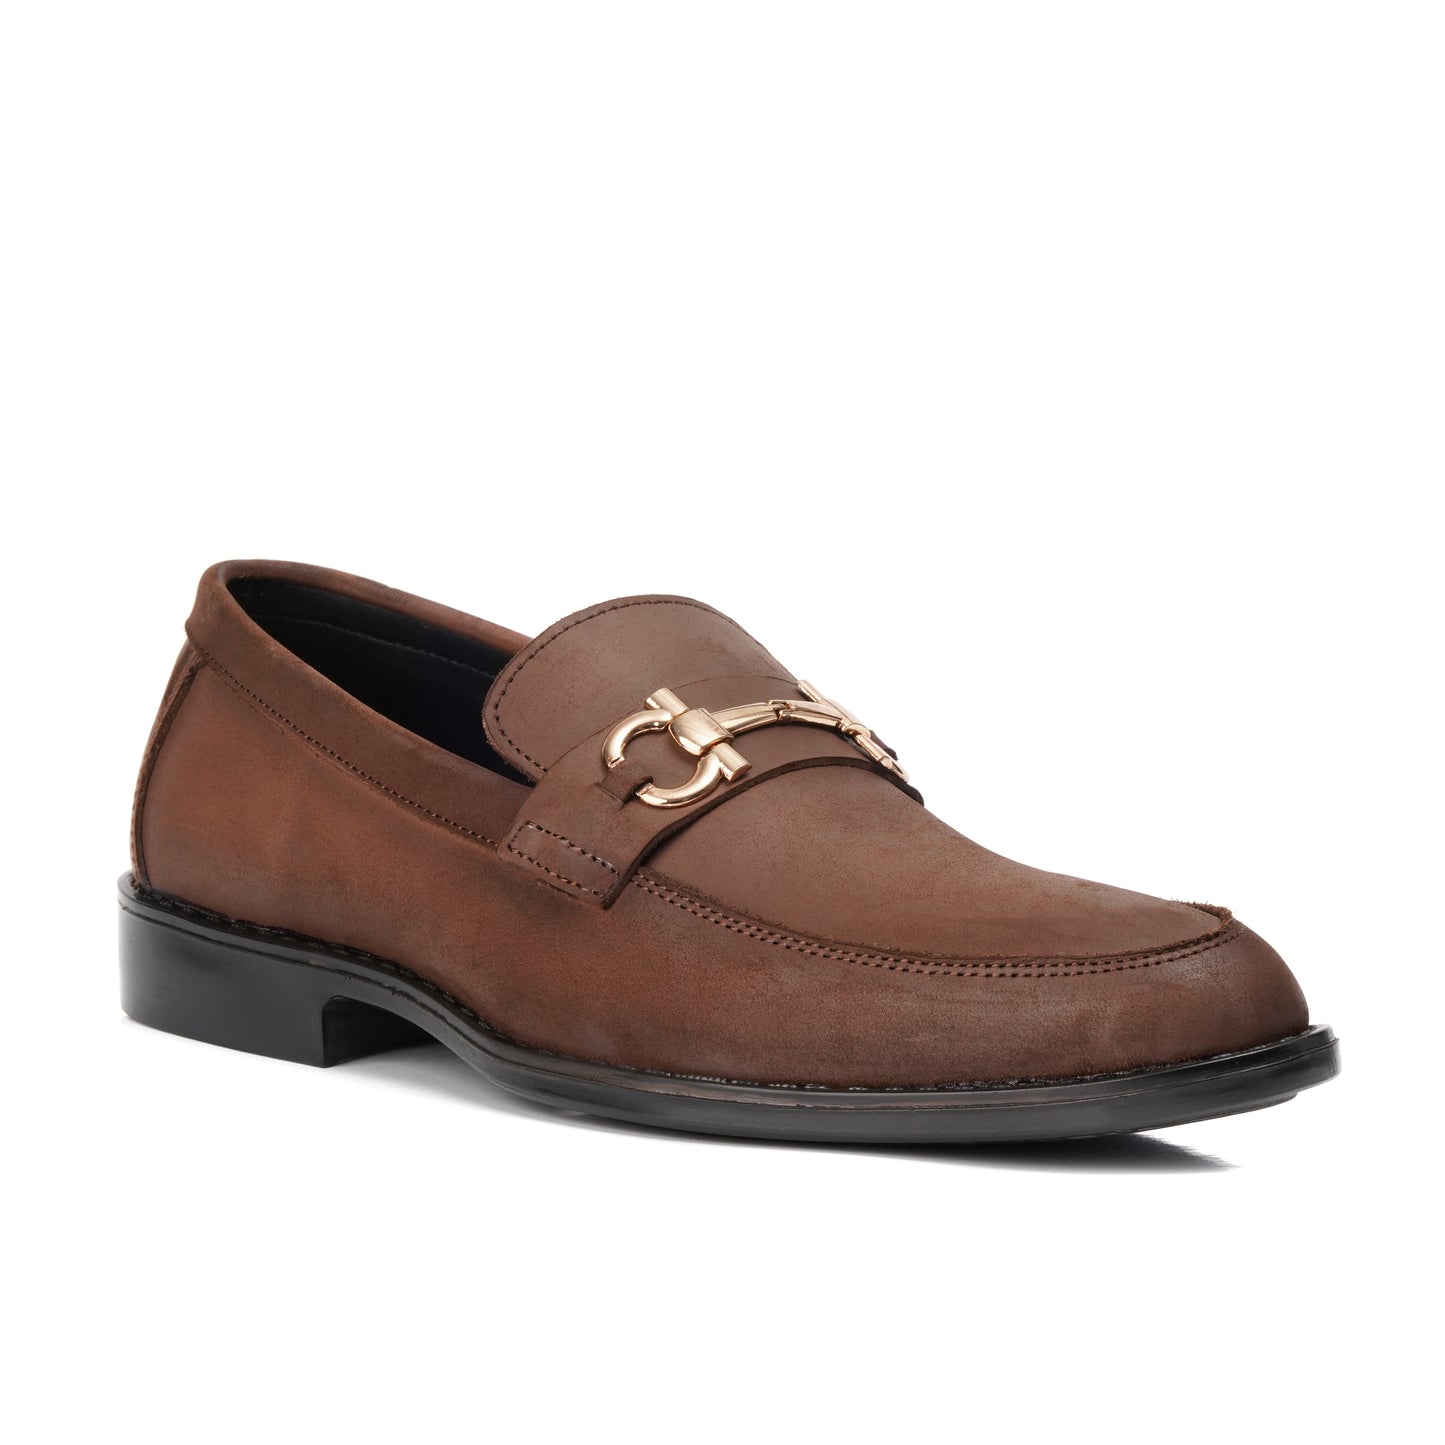 ST-05-Oily Suede Cow Leather Horse bit Formal Loafer Style In Rubber sole